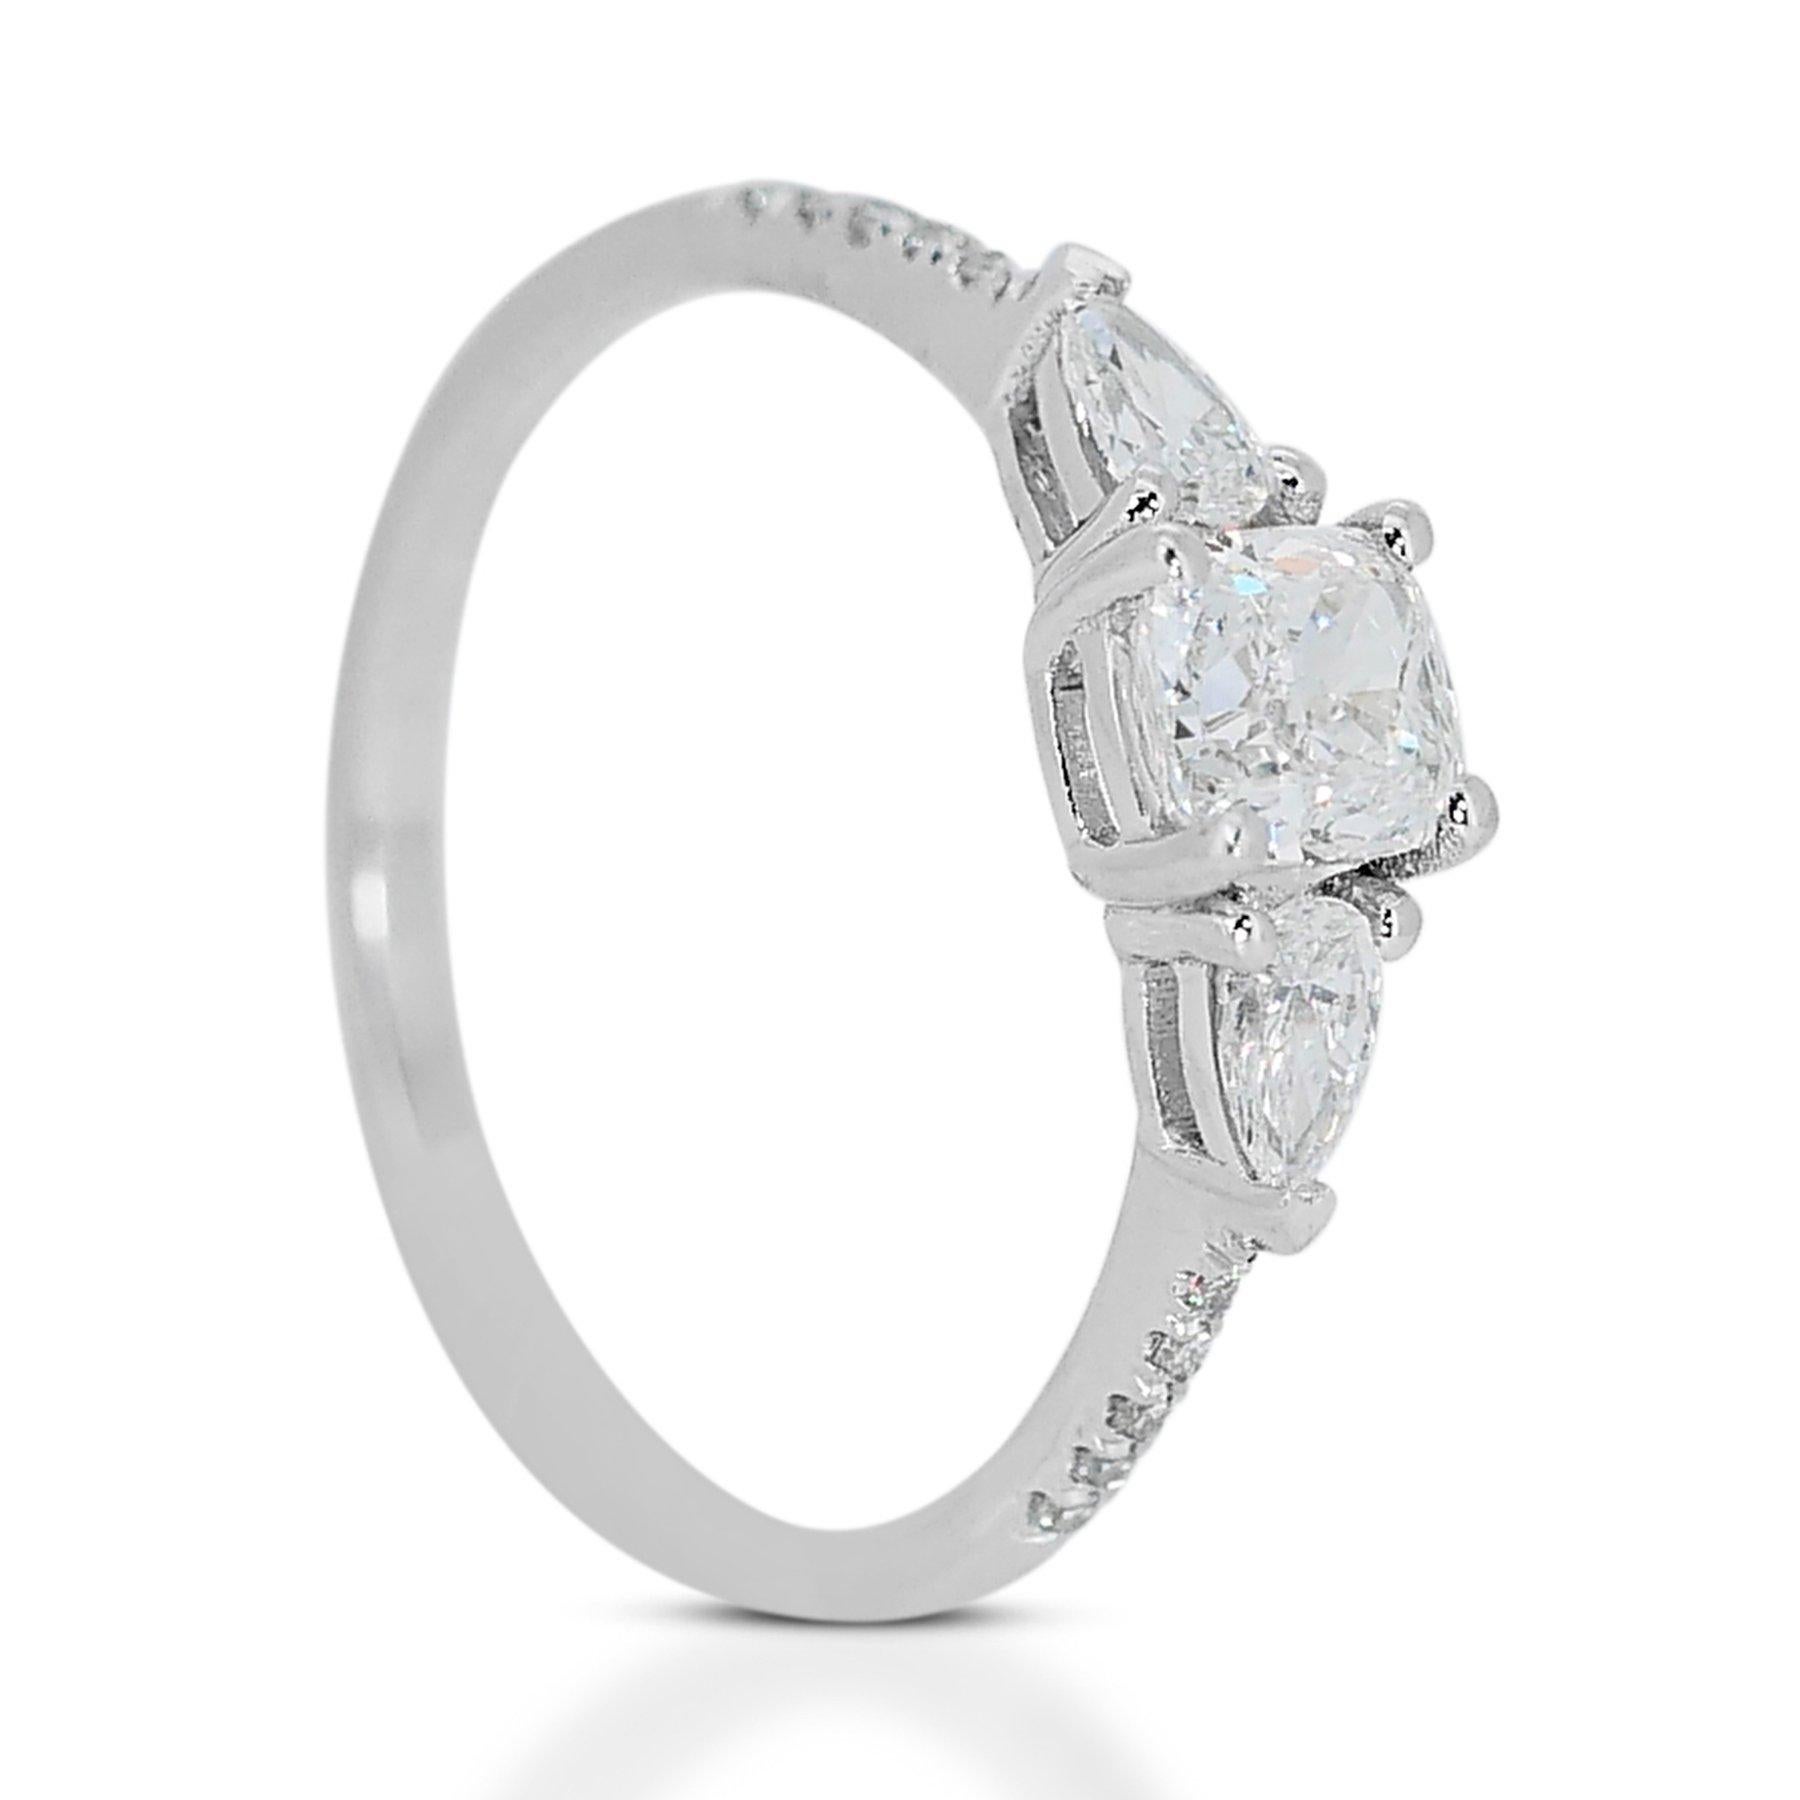 Cushion Cut Captivating 0.73ct Diamond 3-Stone Ring in 18k White Gold - GIA Certified For Sale